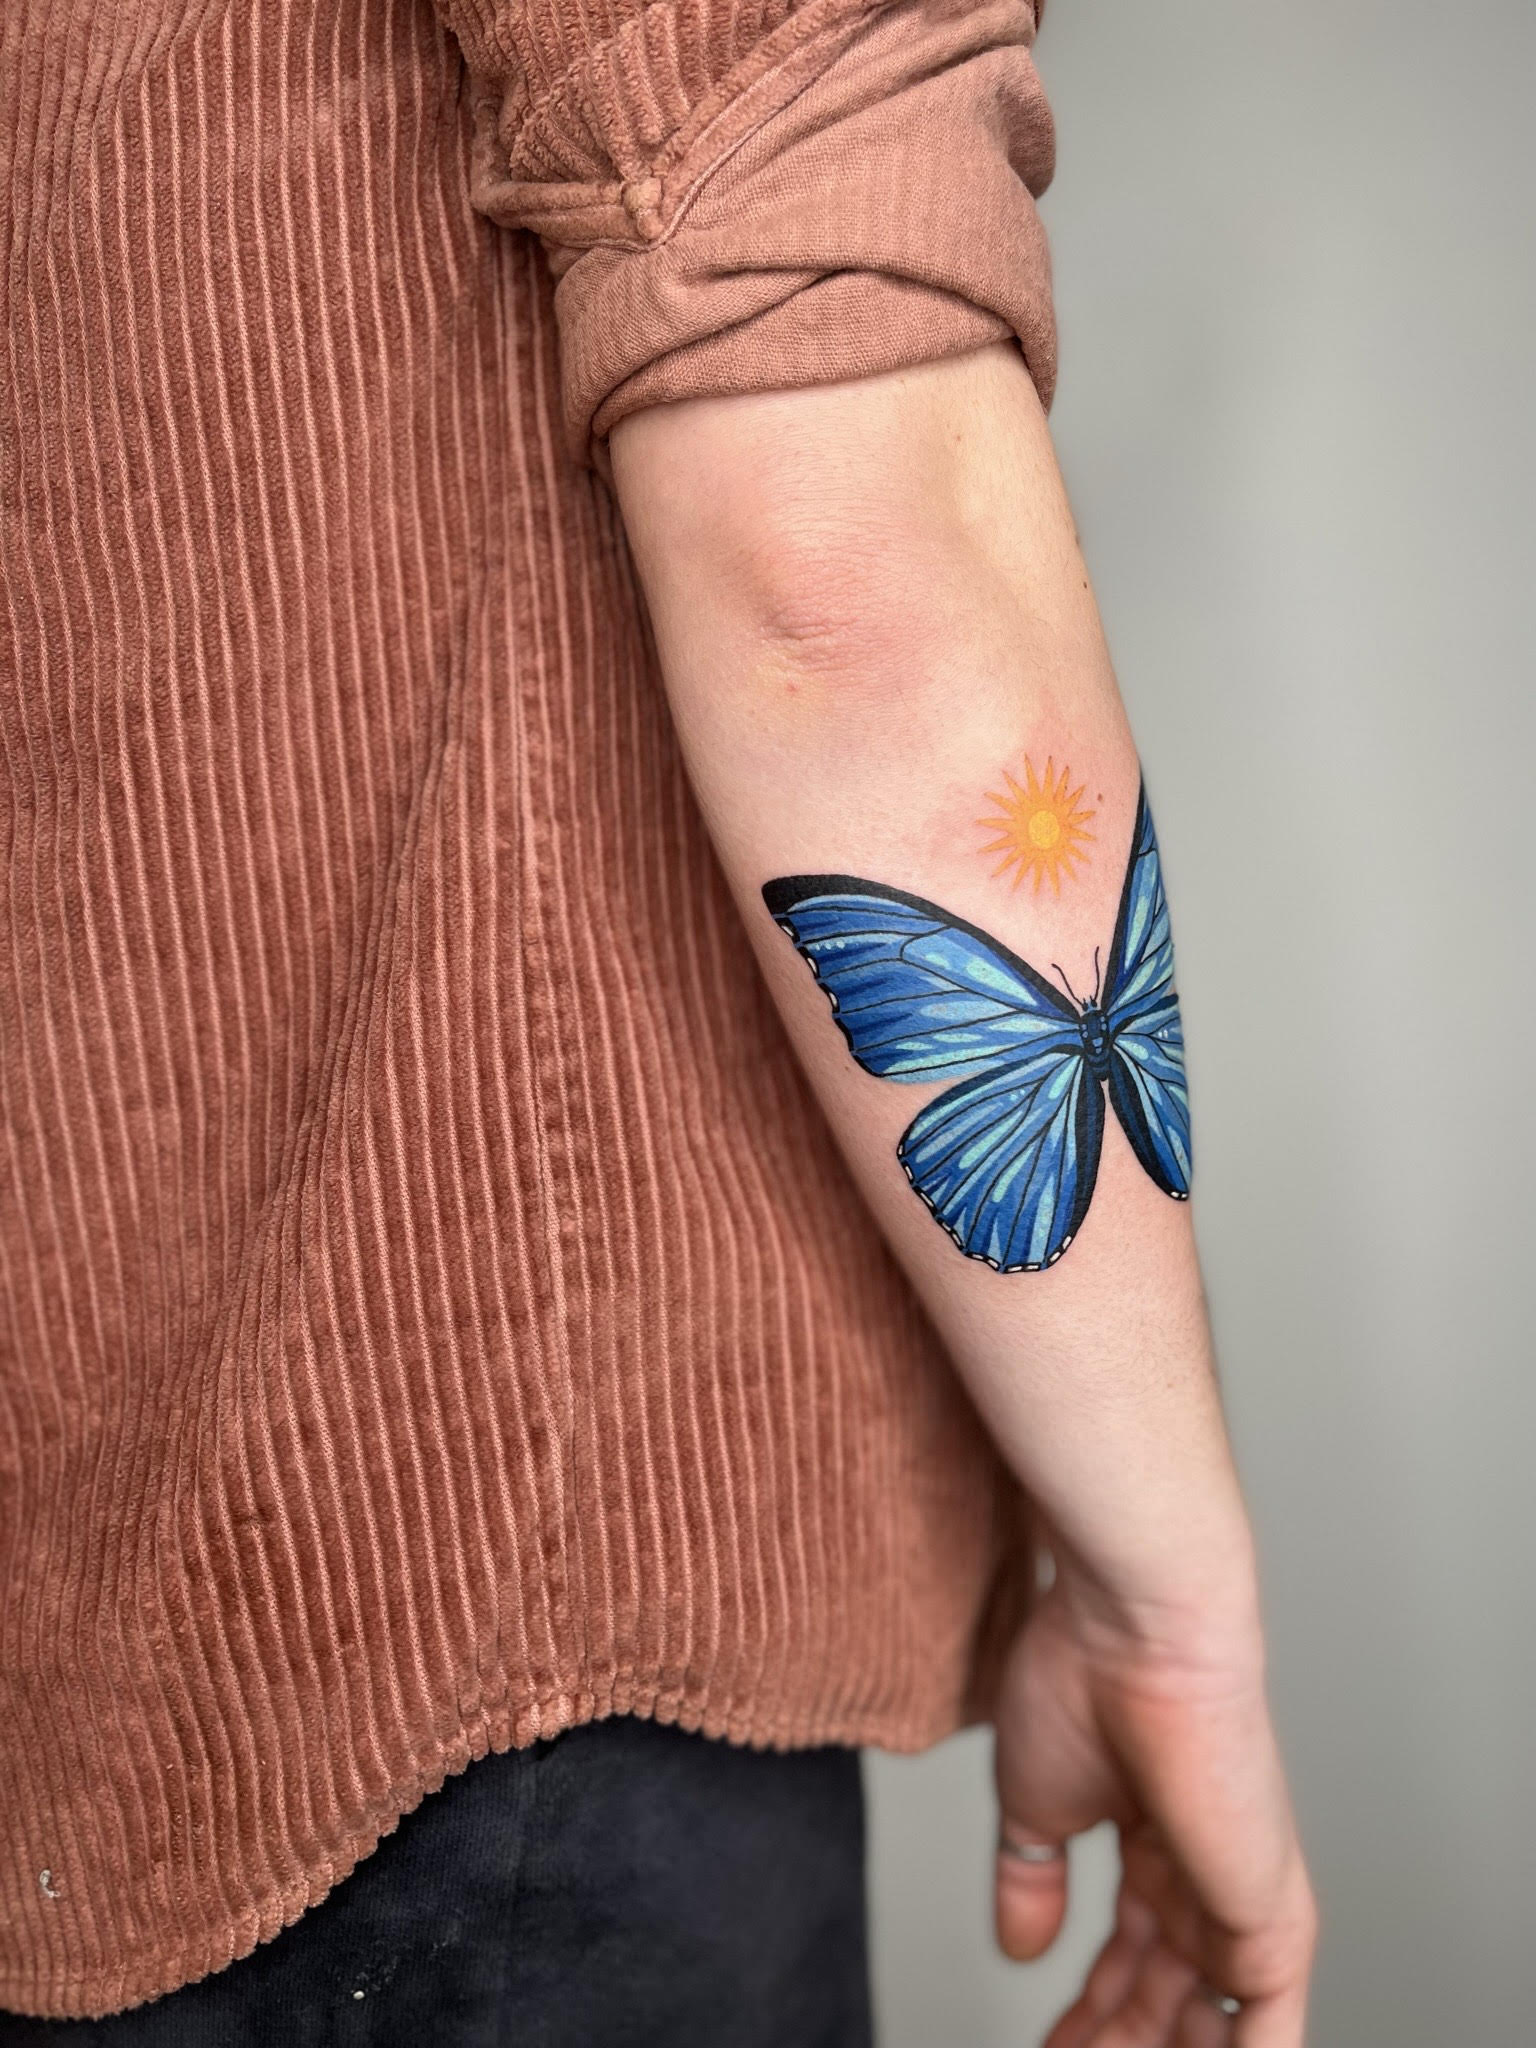 Blue Morpho Butterfly color tattoo